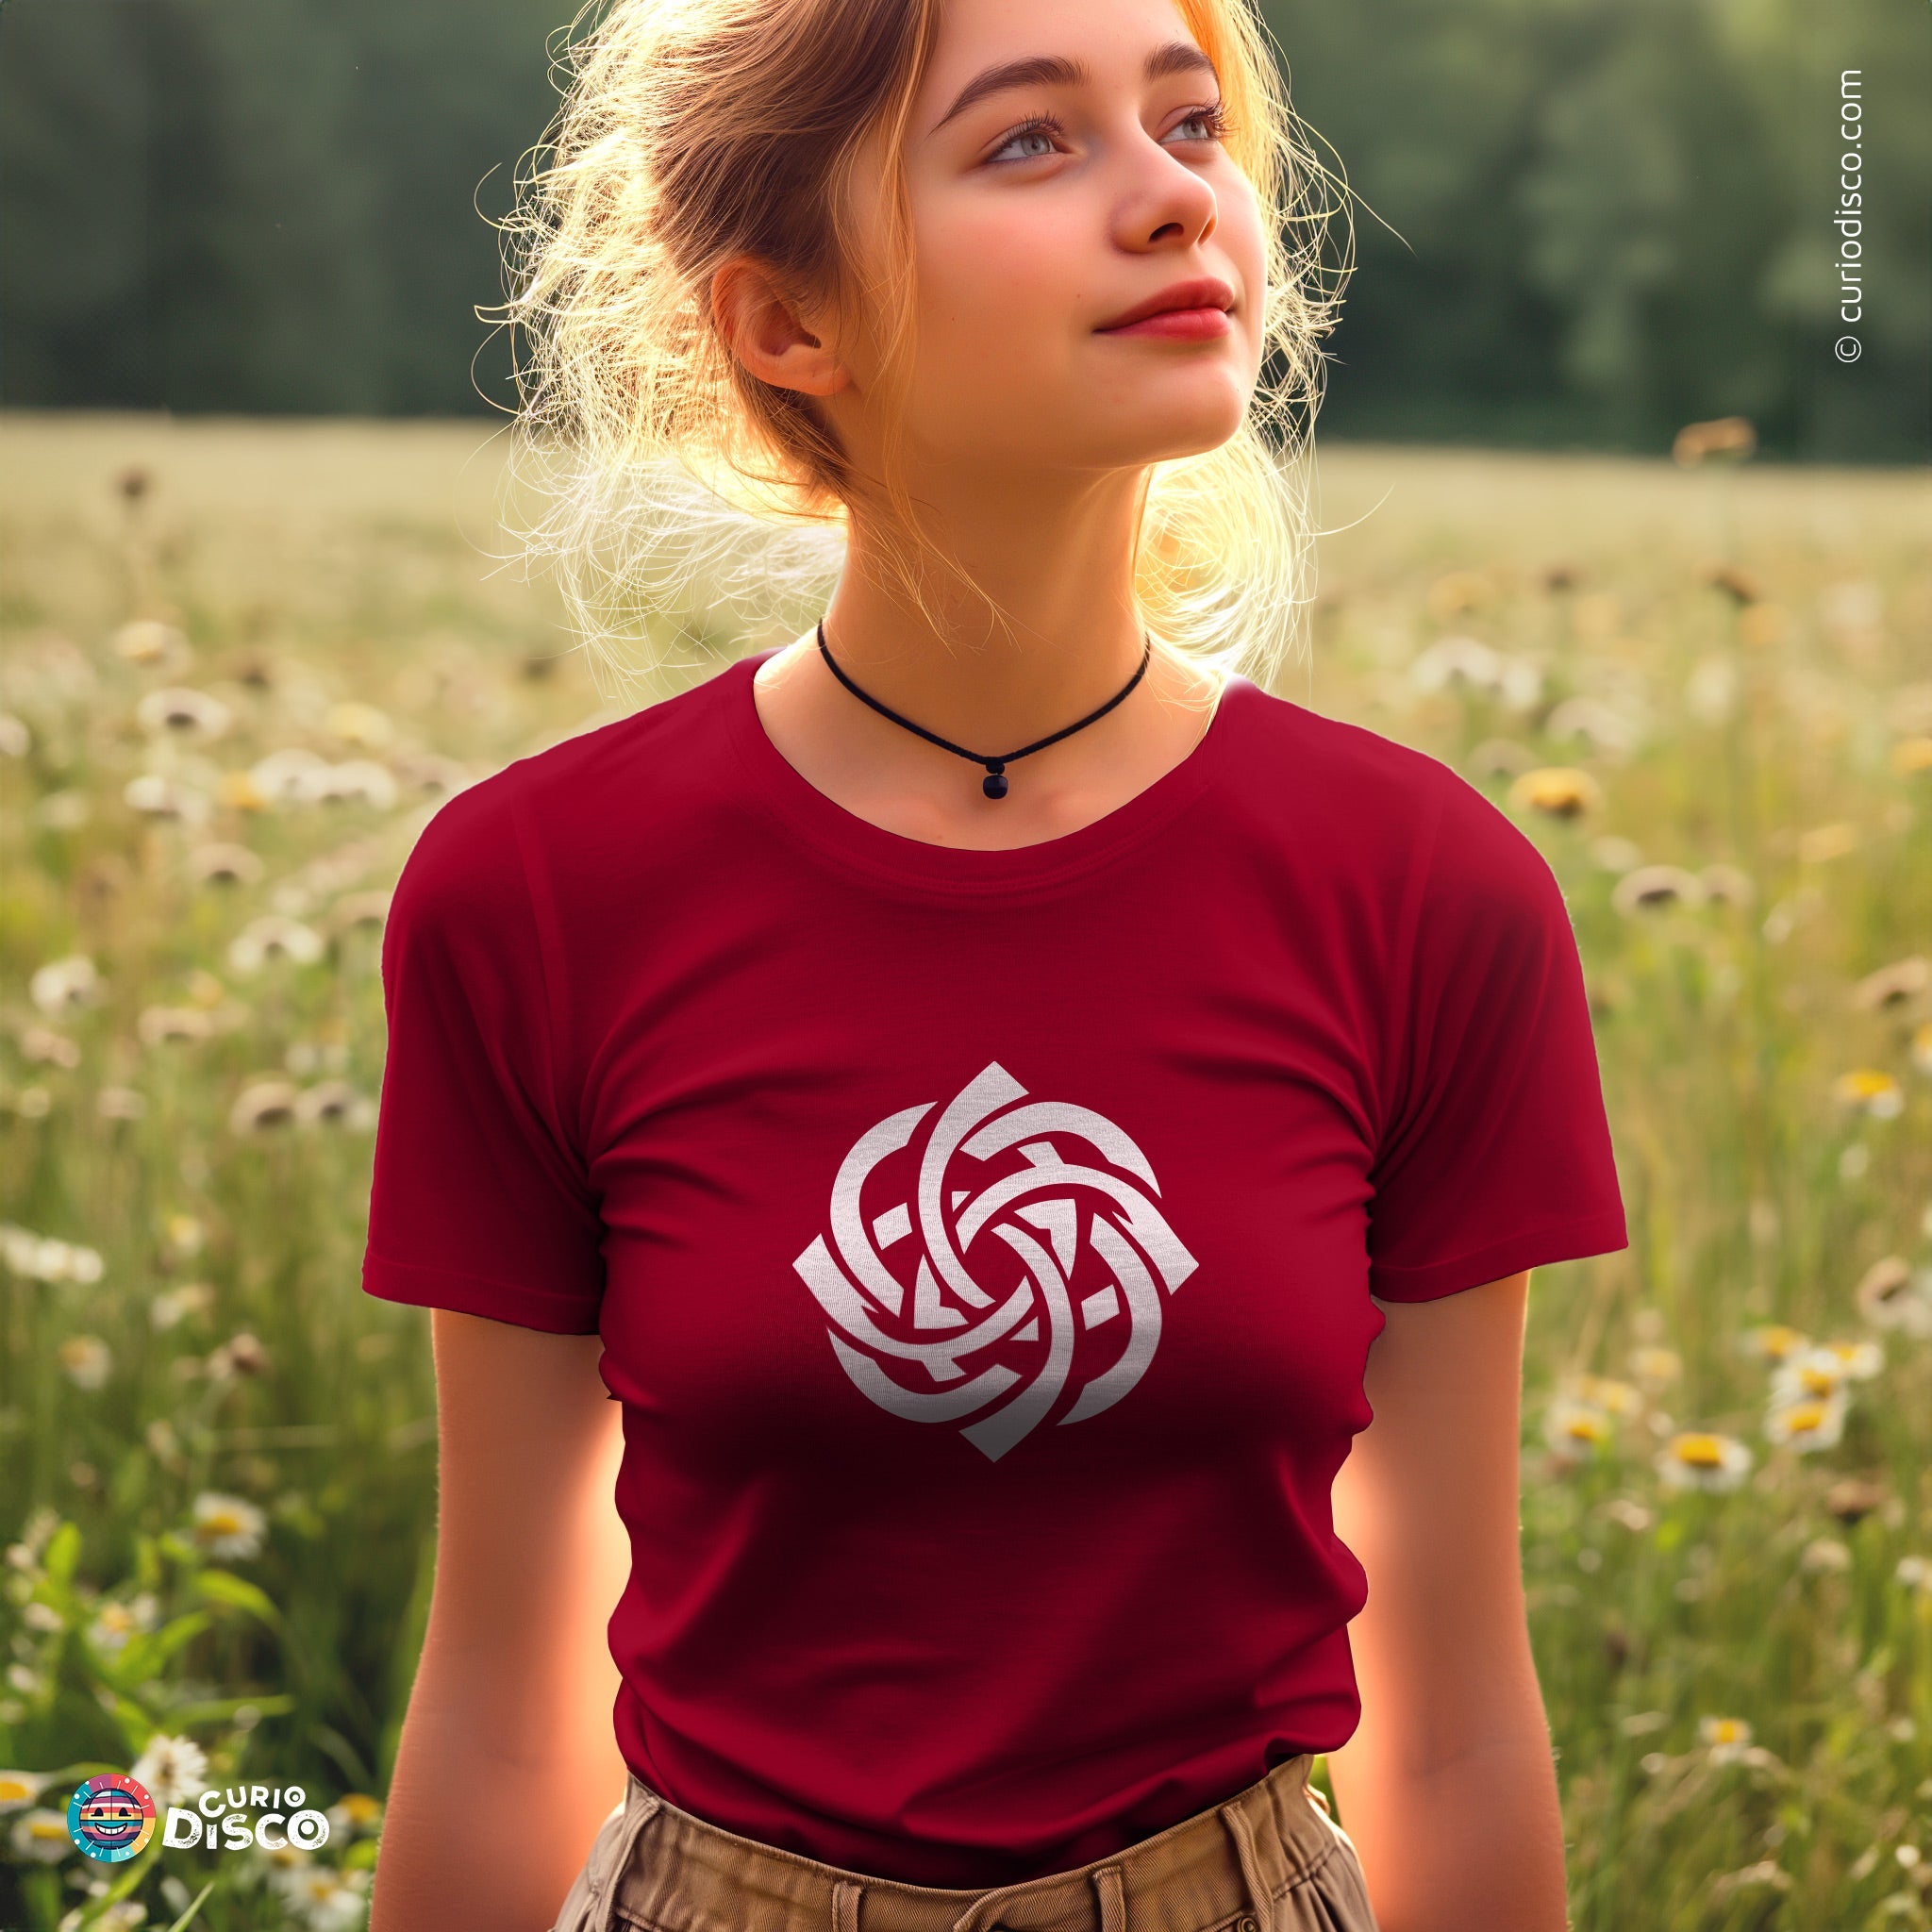 Cardinal red tree of life yoga shirt with celtic knot, ideal as love knot viking nordic celtic gifts, gifts for wife, yoga gifts for her, plus size clothing for mystical cottage core workout, and gifts for mom.